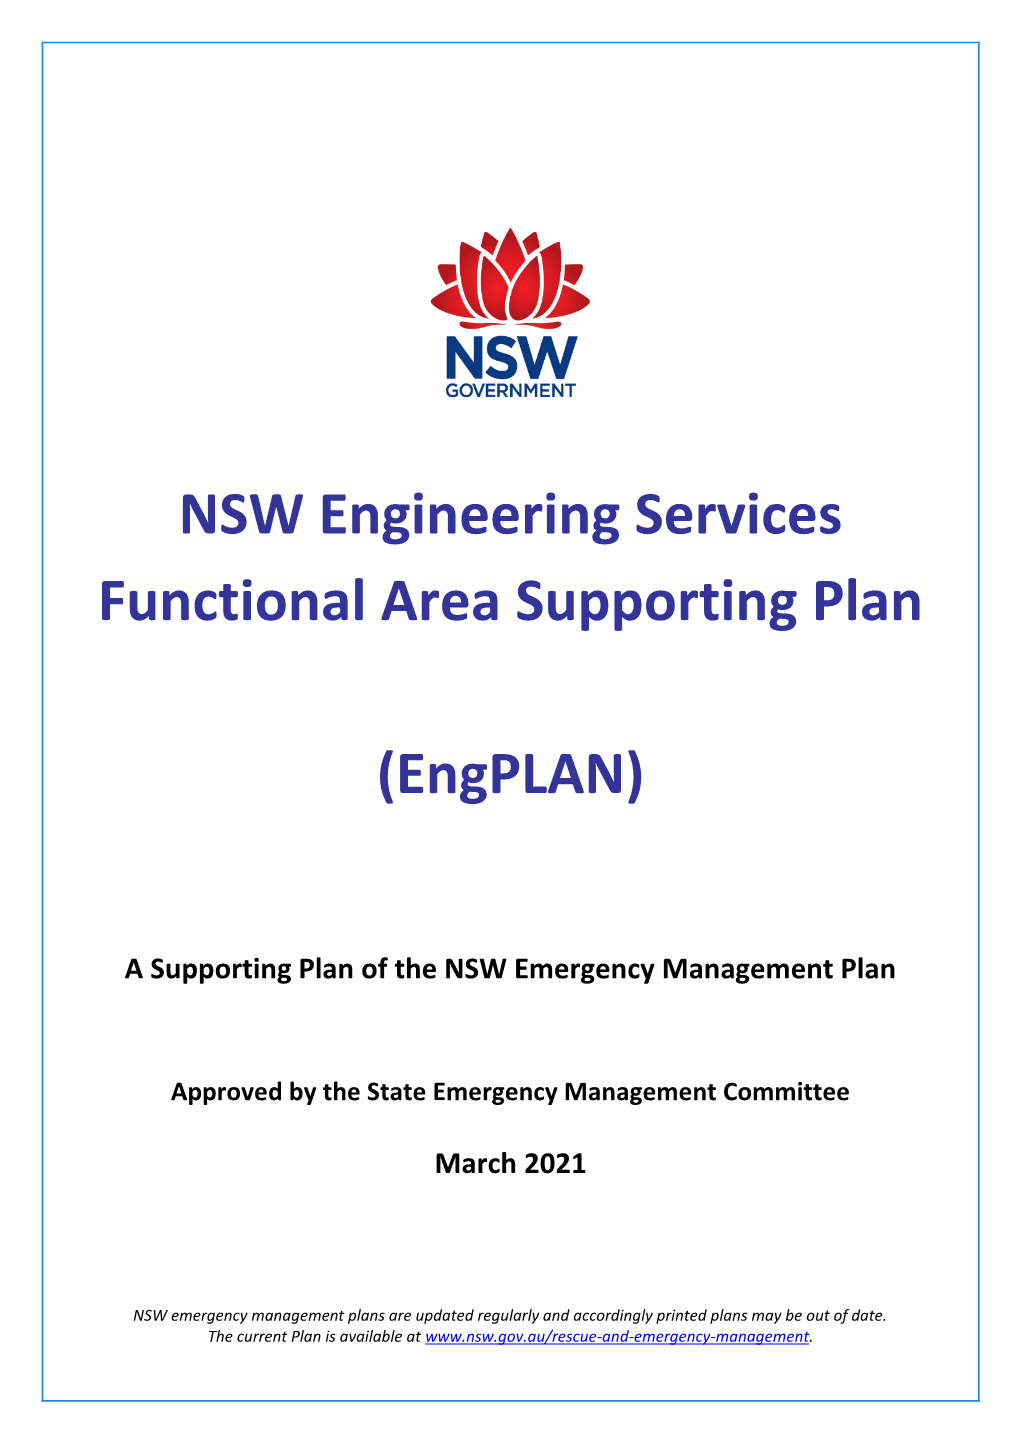 NSW Engineering Services Functional Area Supporting Plan